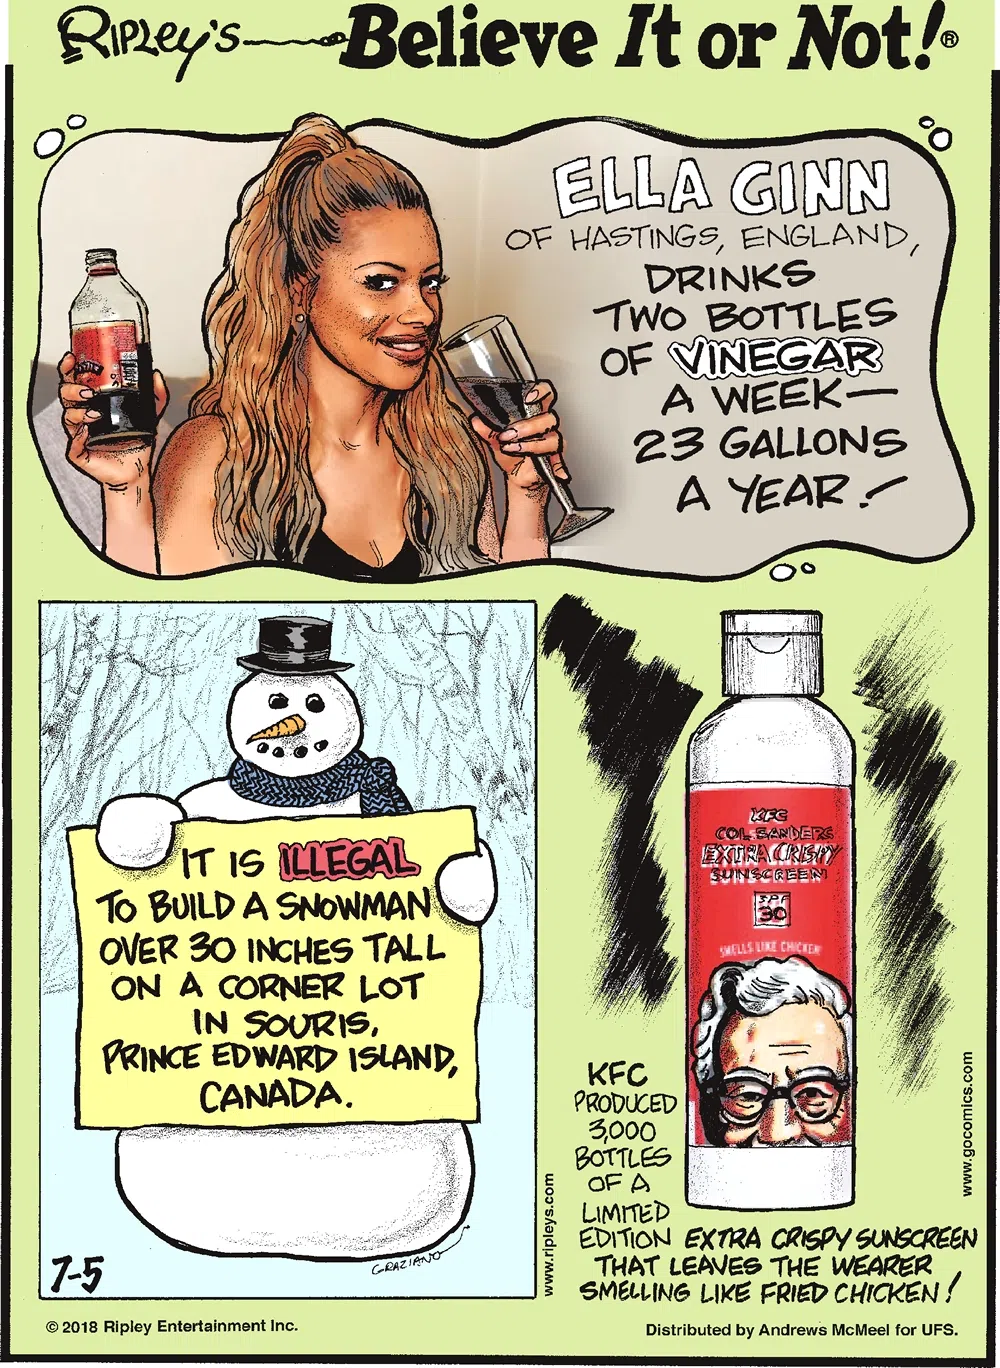 Ella Ginn of Hastings, England, drinks two bottles of vinegar a week - 23 gallons a year!-------------------- It is illegal to build a snowman over 30 inches tall on a corner lot in Souris, Prince Edward Island, Canada.-------------------- KFC produced 3,000 bottles of a limited edition Extra Crispy Sunscreen that leaves the wearer smelling like fried chicken!